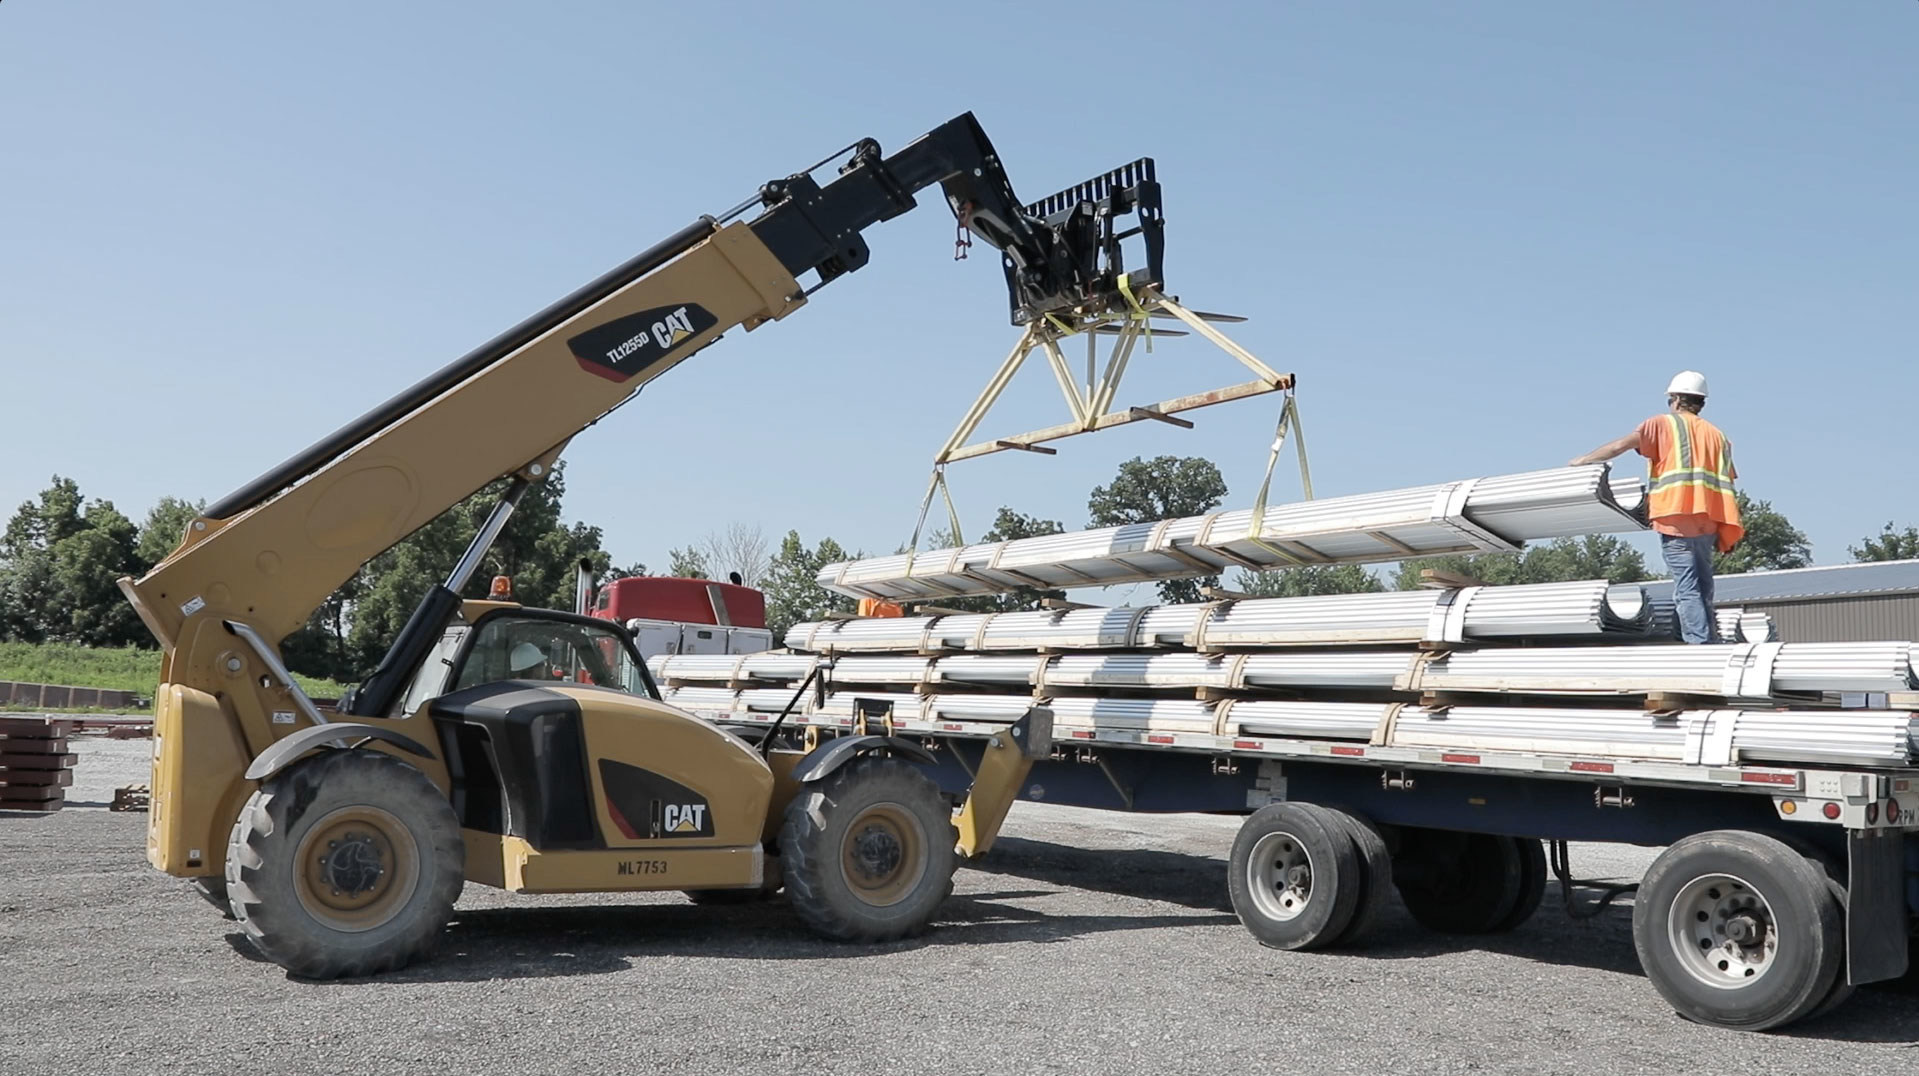 Ten trucks deliver steel I beams for the construction of the facility expansion